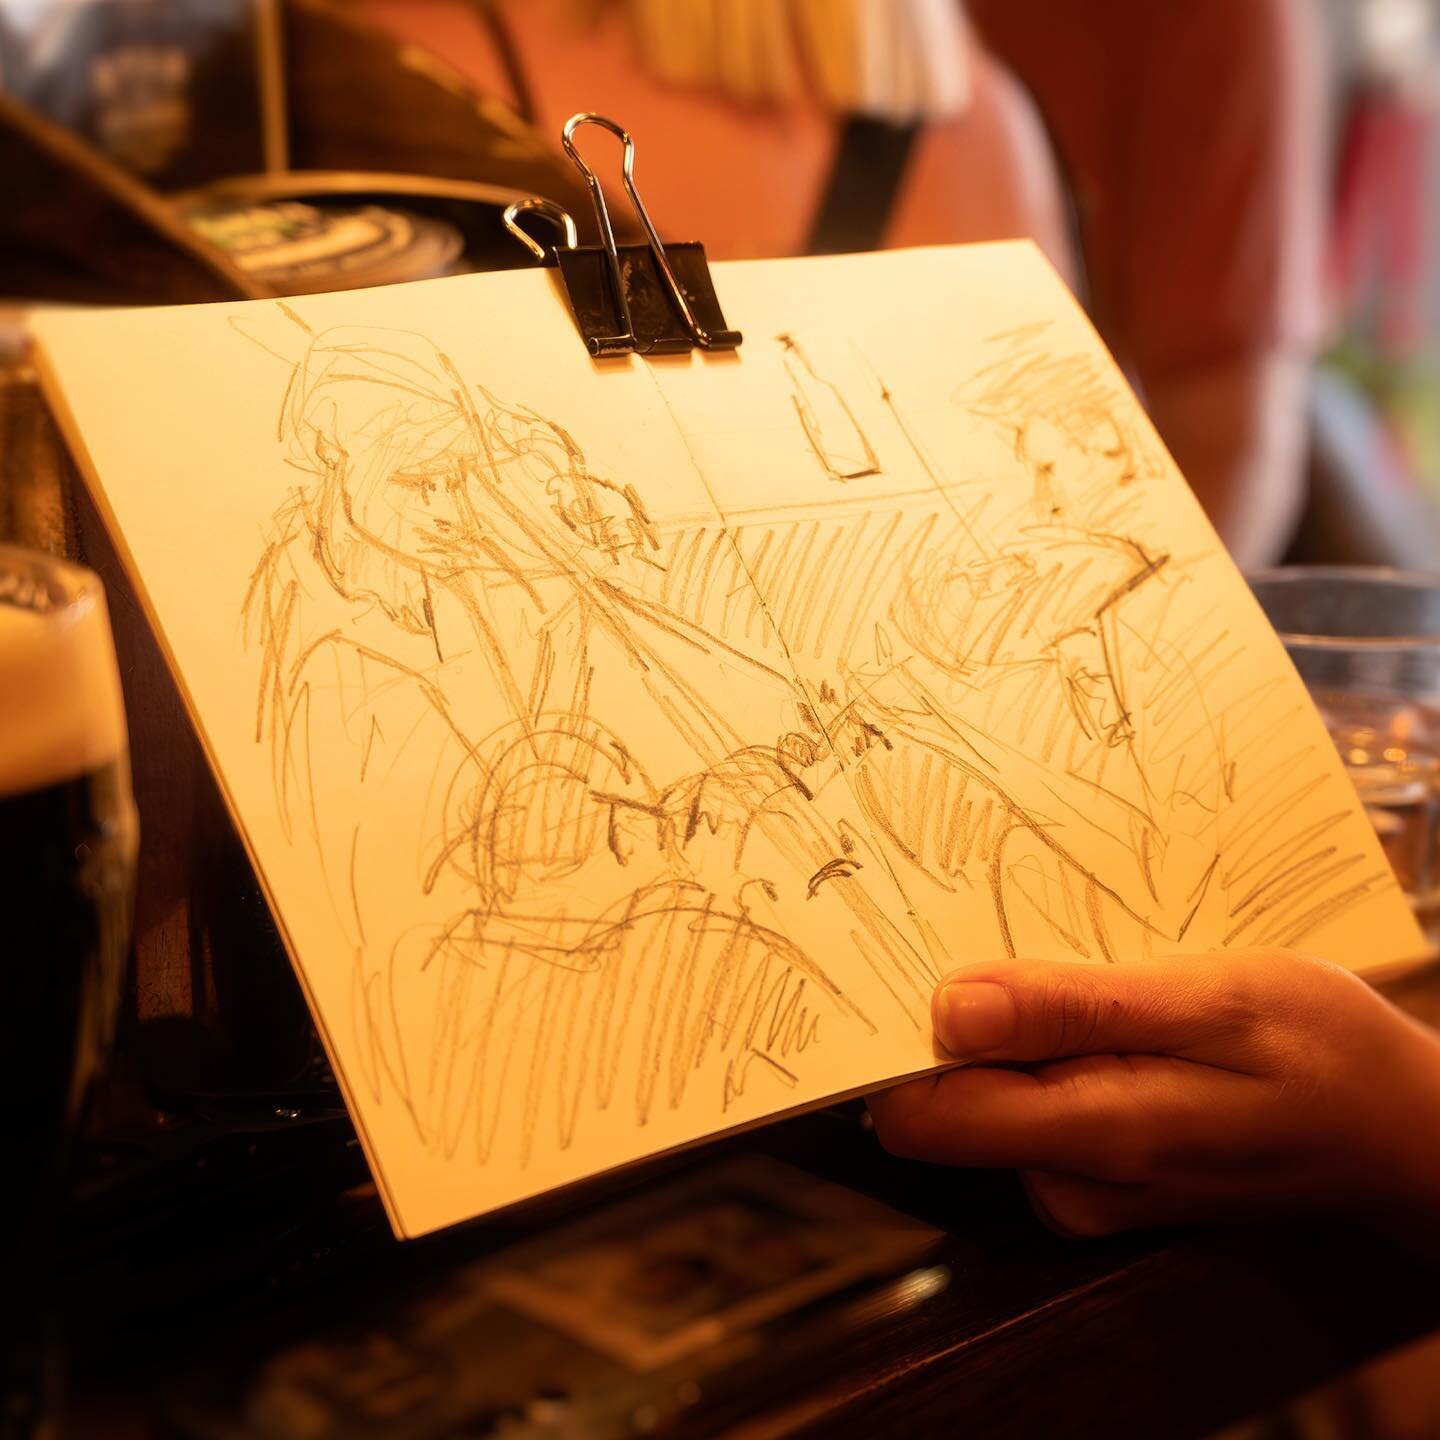 Behold the beautiful artistry of one of our valued patrons capturing the life and energy of our Traditional Sunday Seisi&uacute;n. Make sure to come on down and enjoy our live music every Sunday! 

Sl&aacute;inte.

🎨 @annabelleblott 

#thewhiskeytum